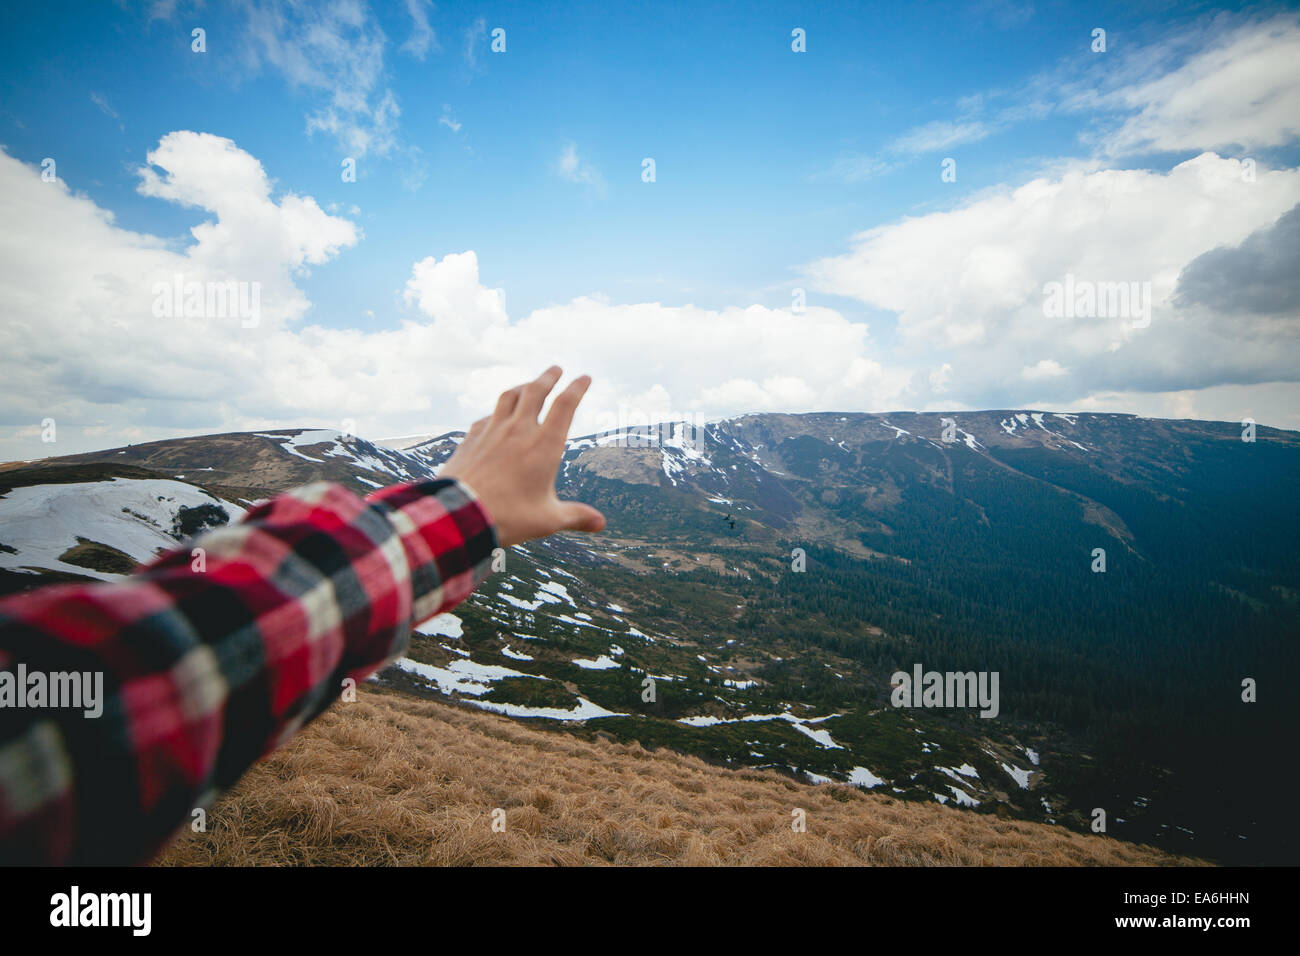 Scenic landscape with human hand in foreground Stock Photo